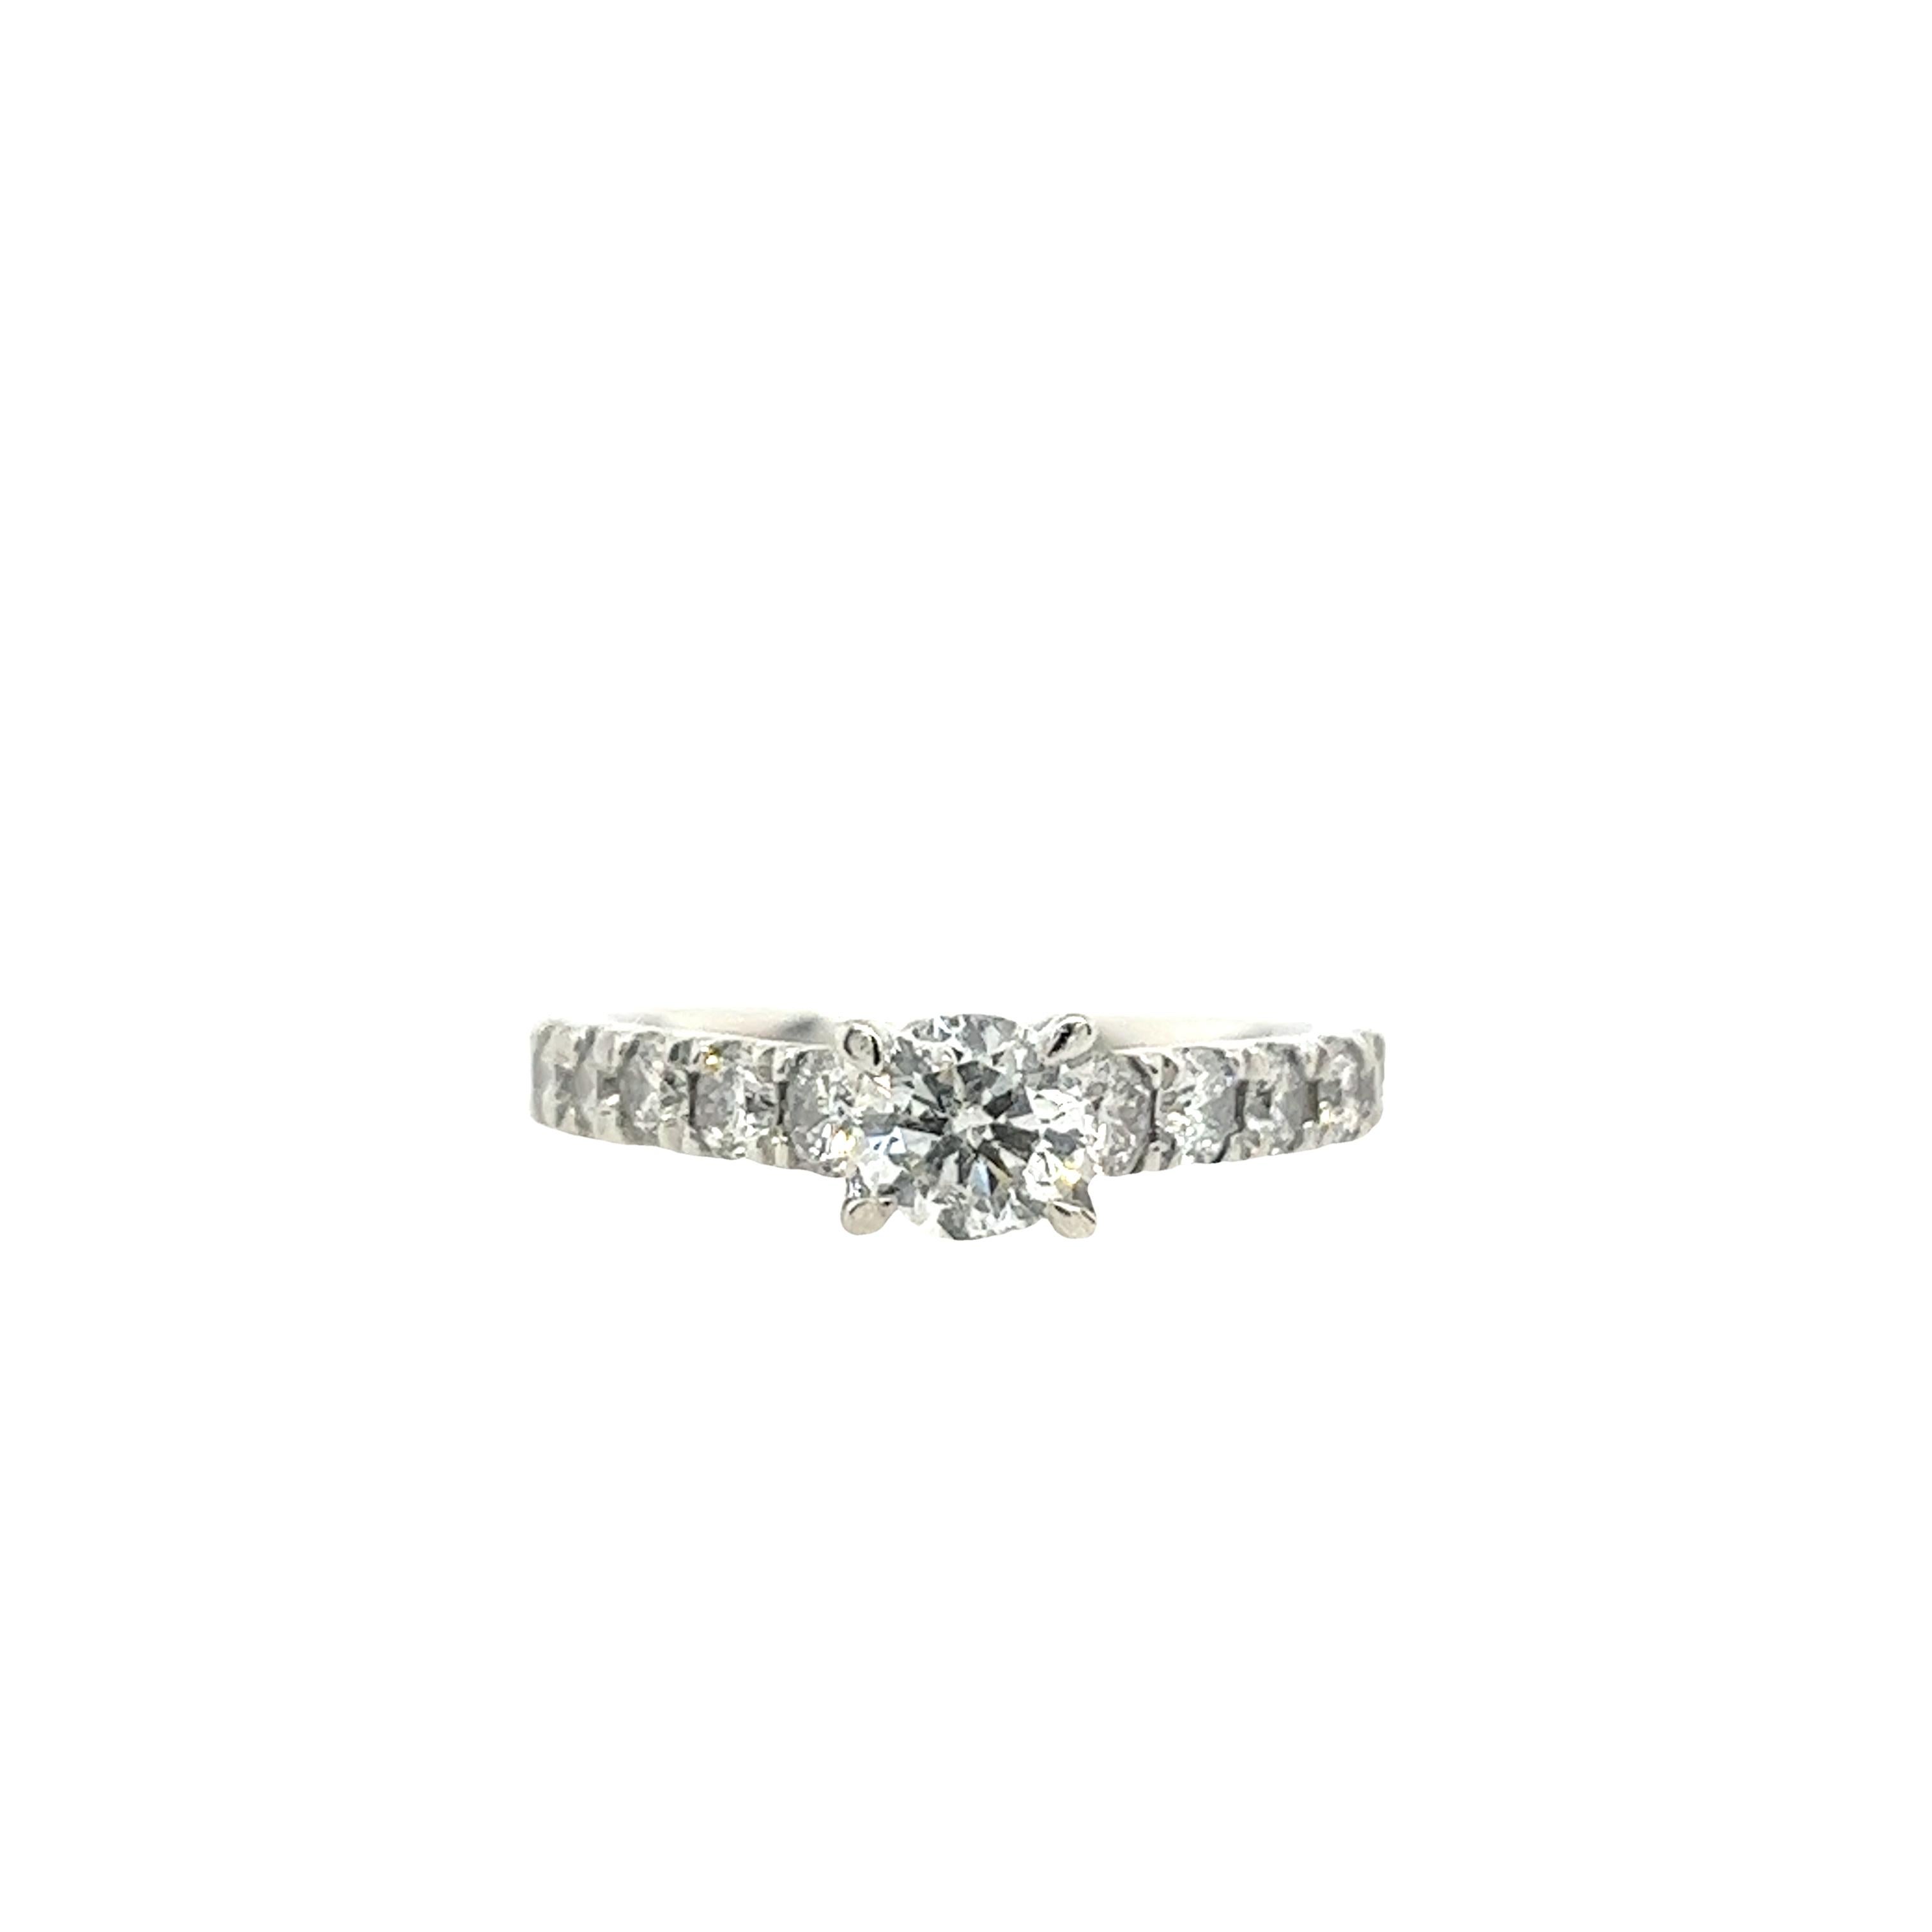 Round Cut Platinum Diamond Solitaire Ring Set With 0.40ct Round Diamond & 0.62ct On Sides For Sale